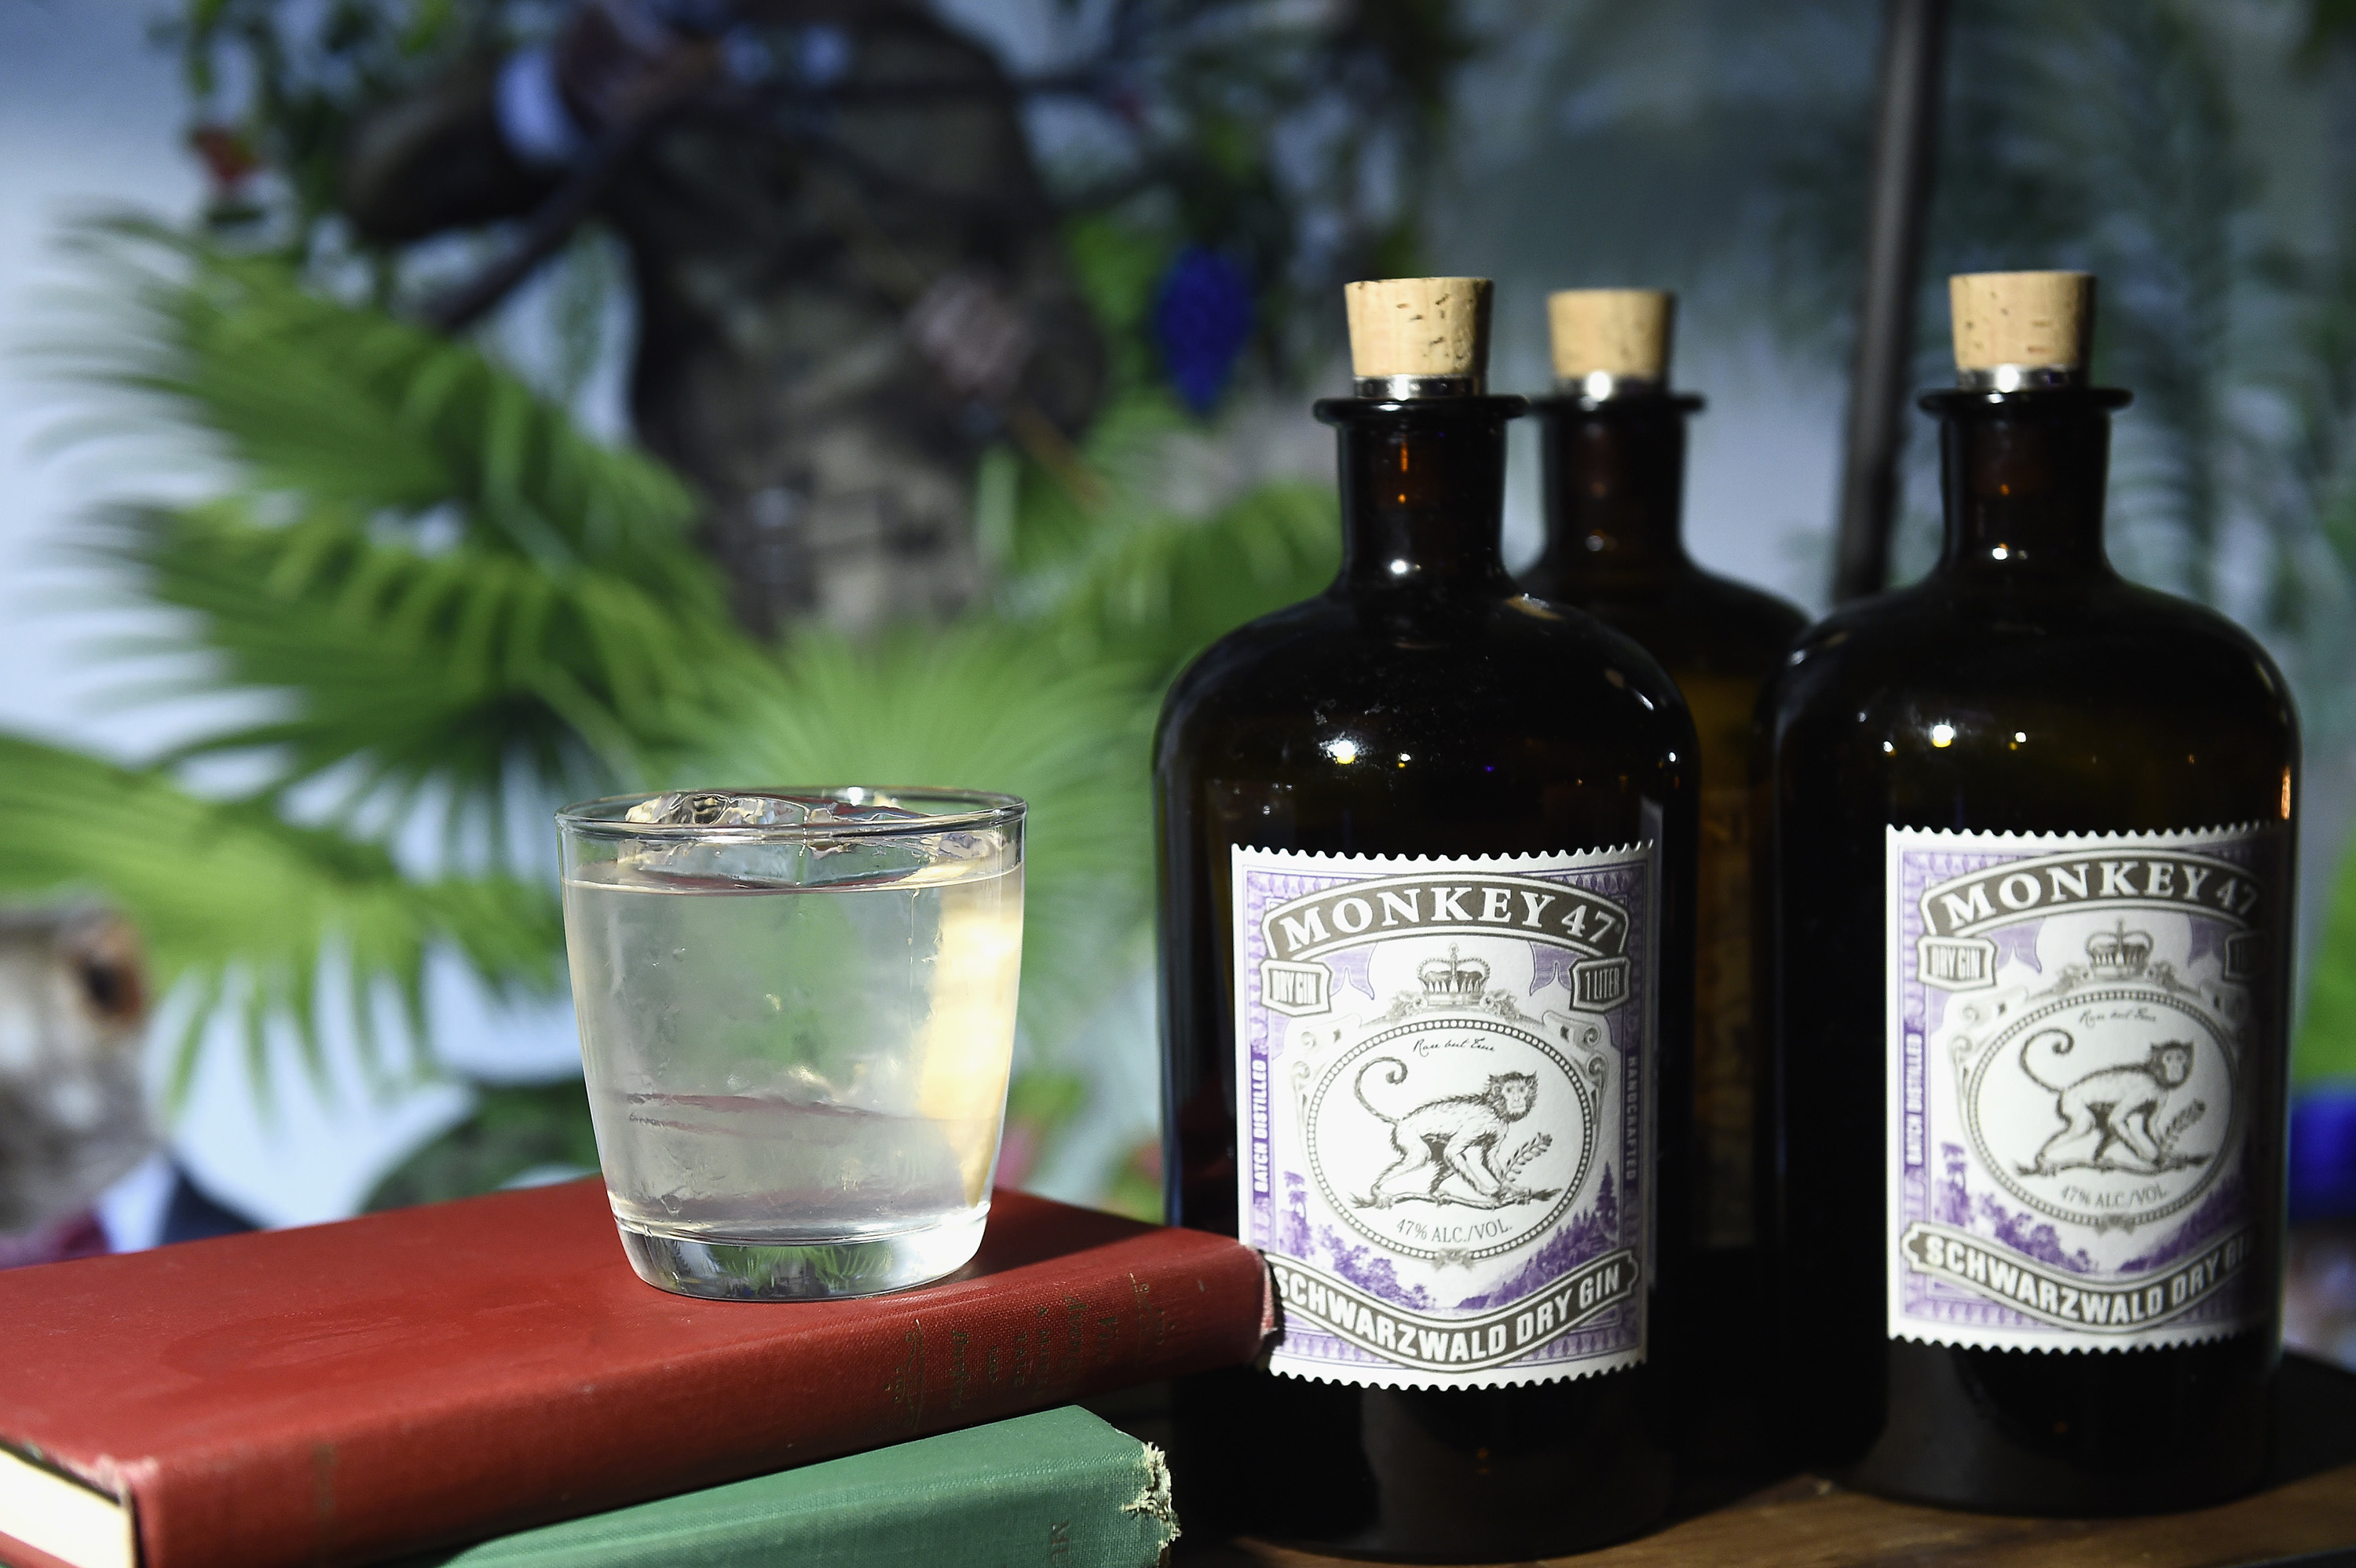 Monkey 47 - The Incredible History of Schwarzwald Dry Gin